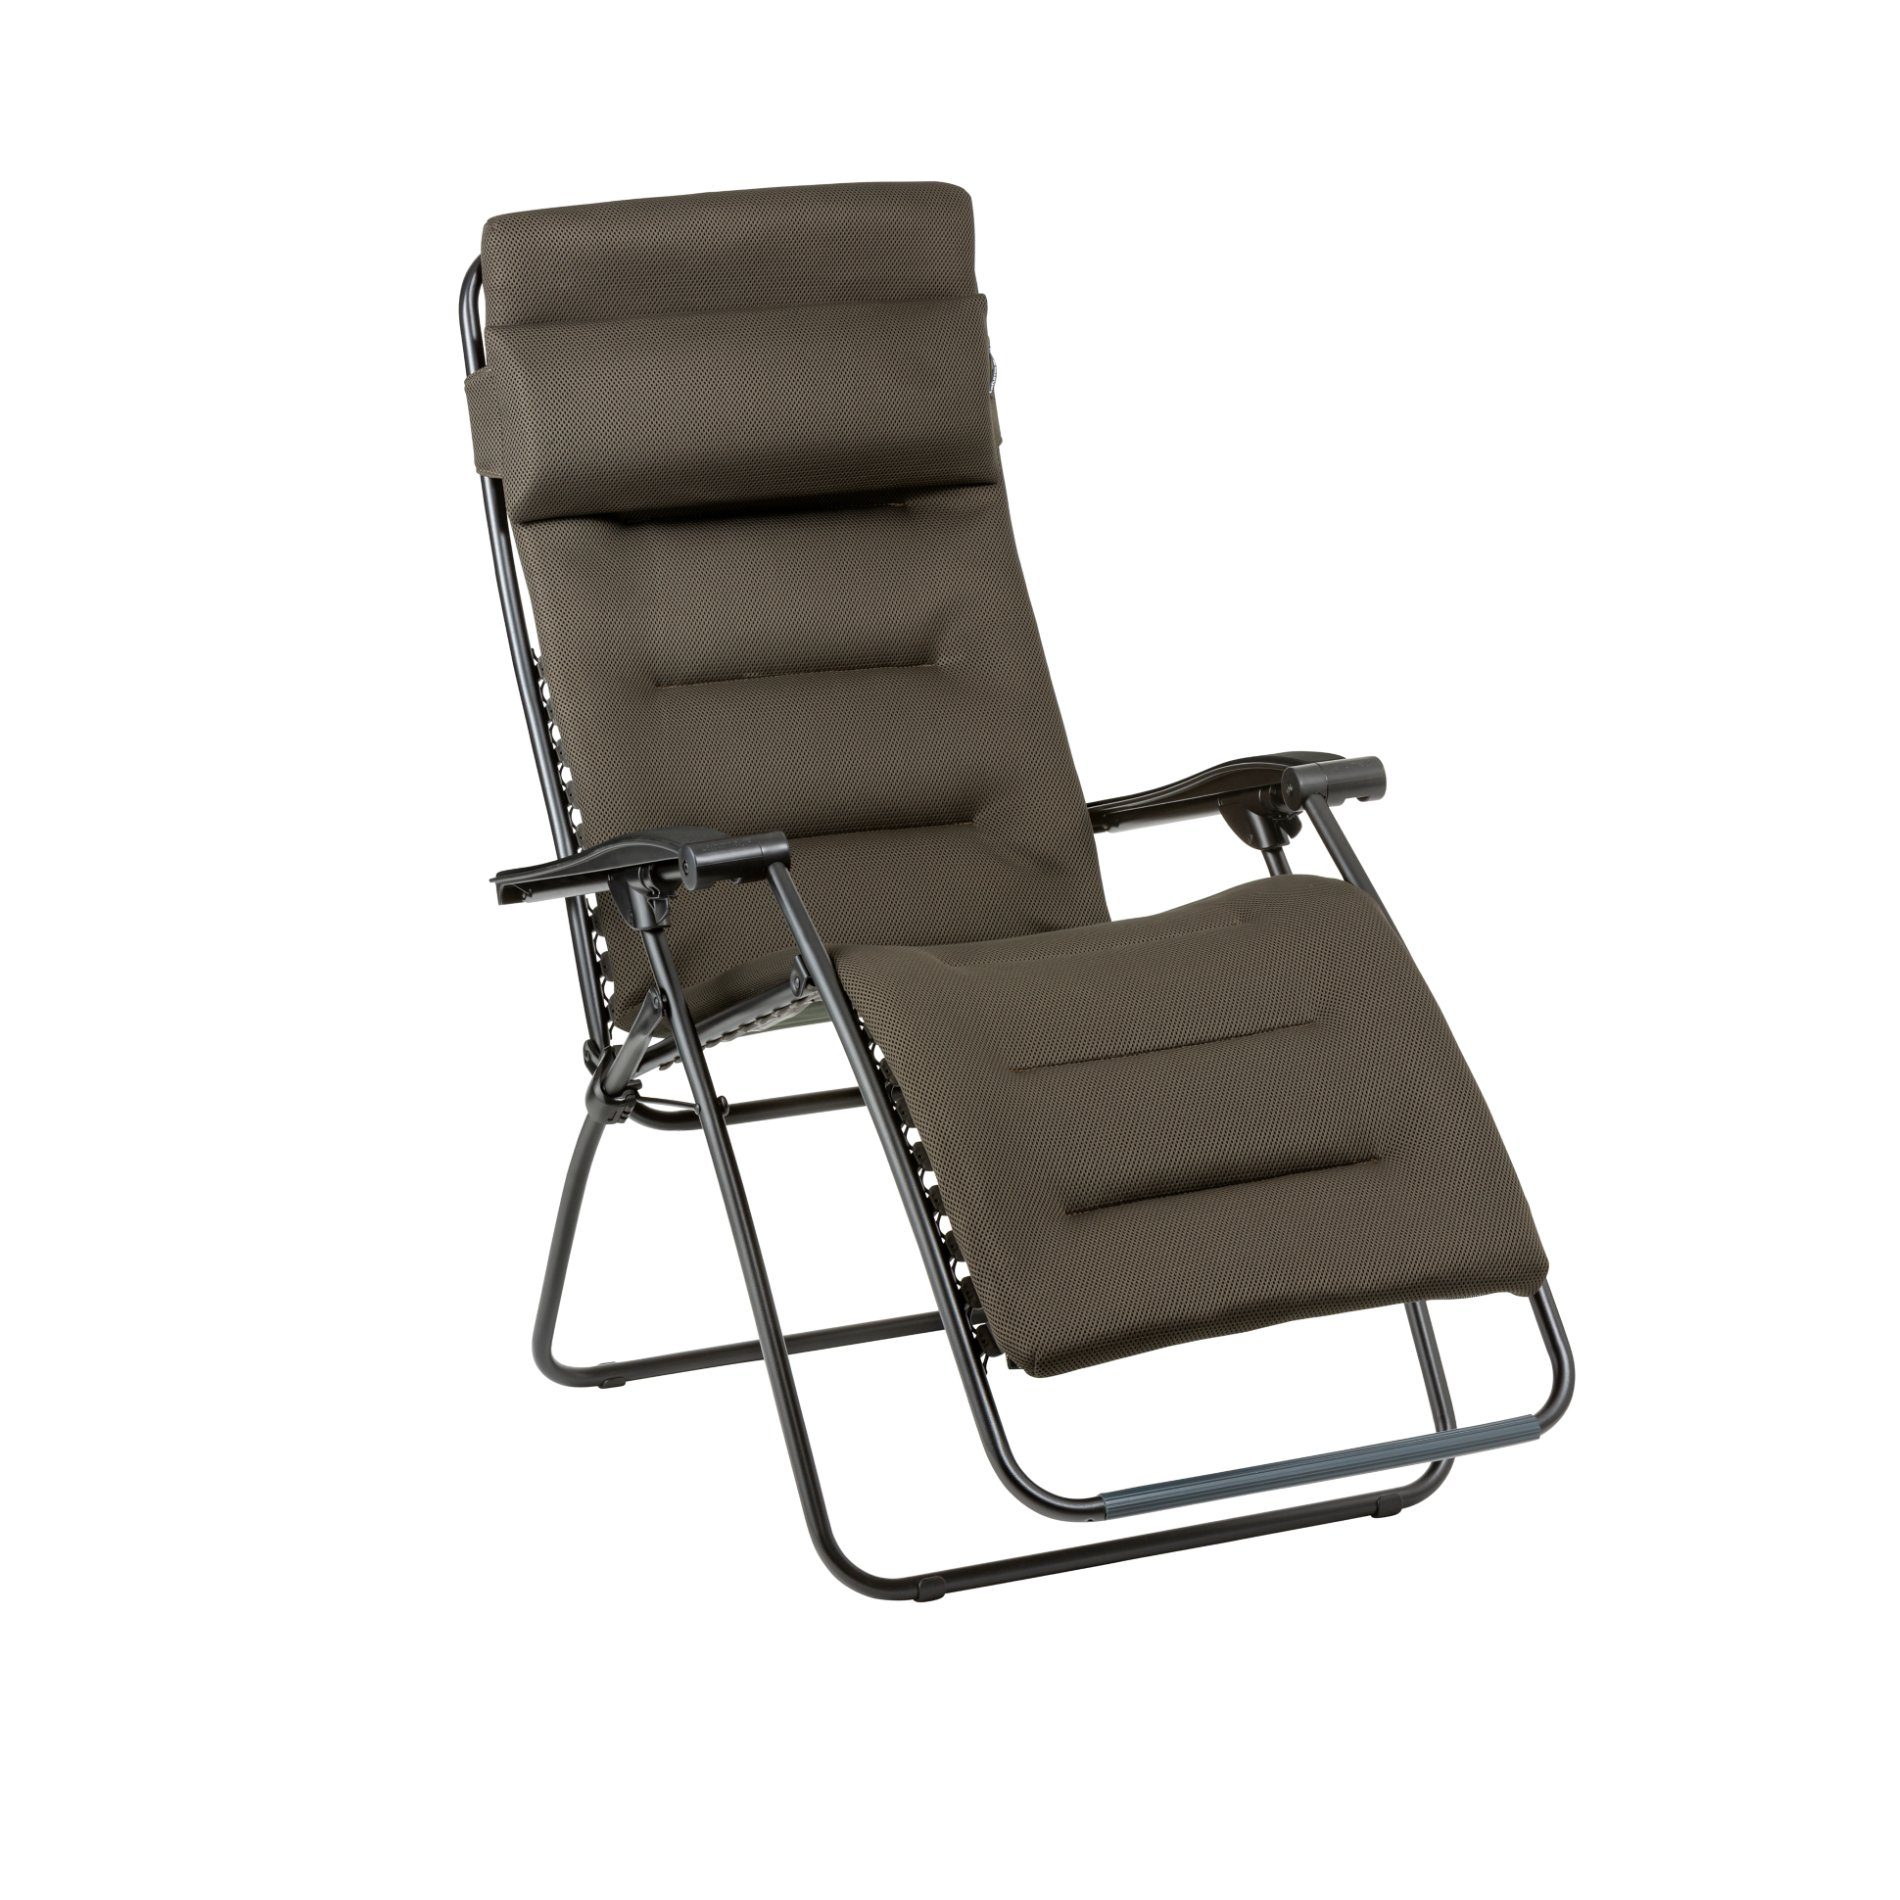 Lafuma Relaxsessel "RSX Clip", Stahlrohr schwarz, Textilgewebe AIR COMFORT® taupe © LAFUMA MOBILIER - Pierrick Verny